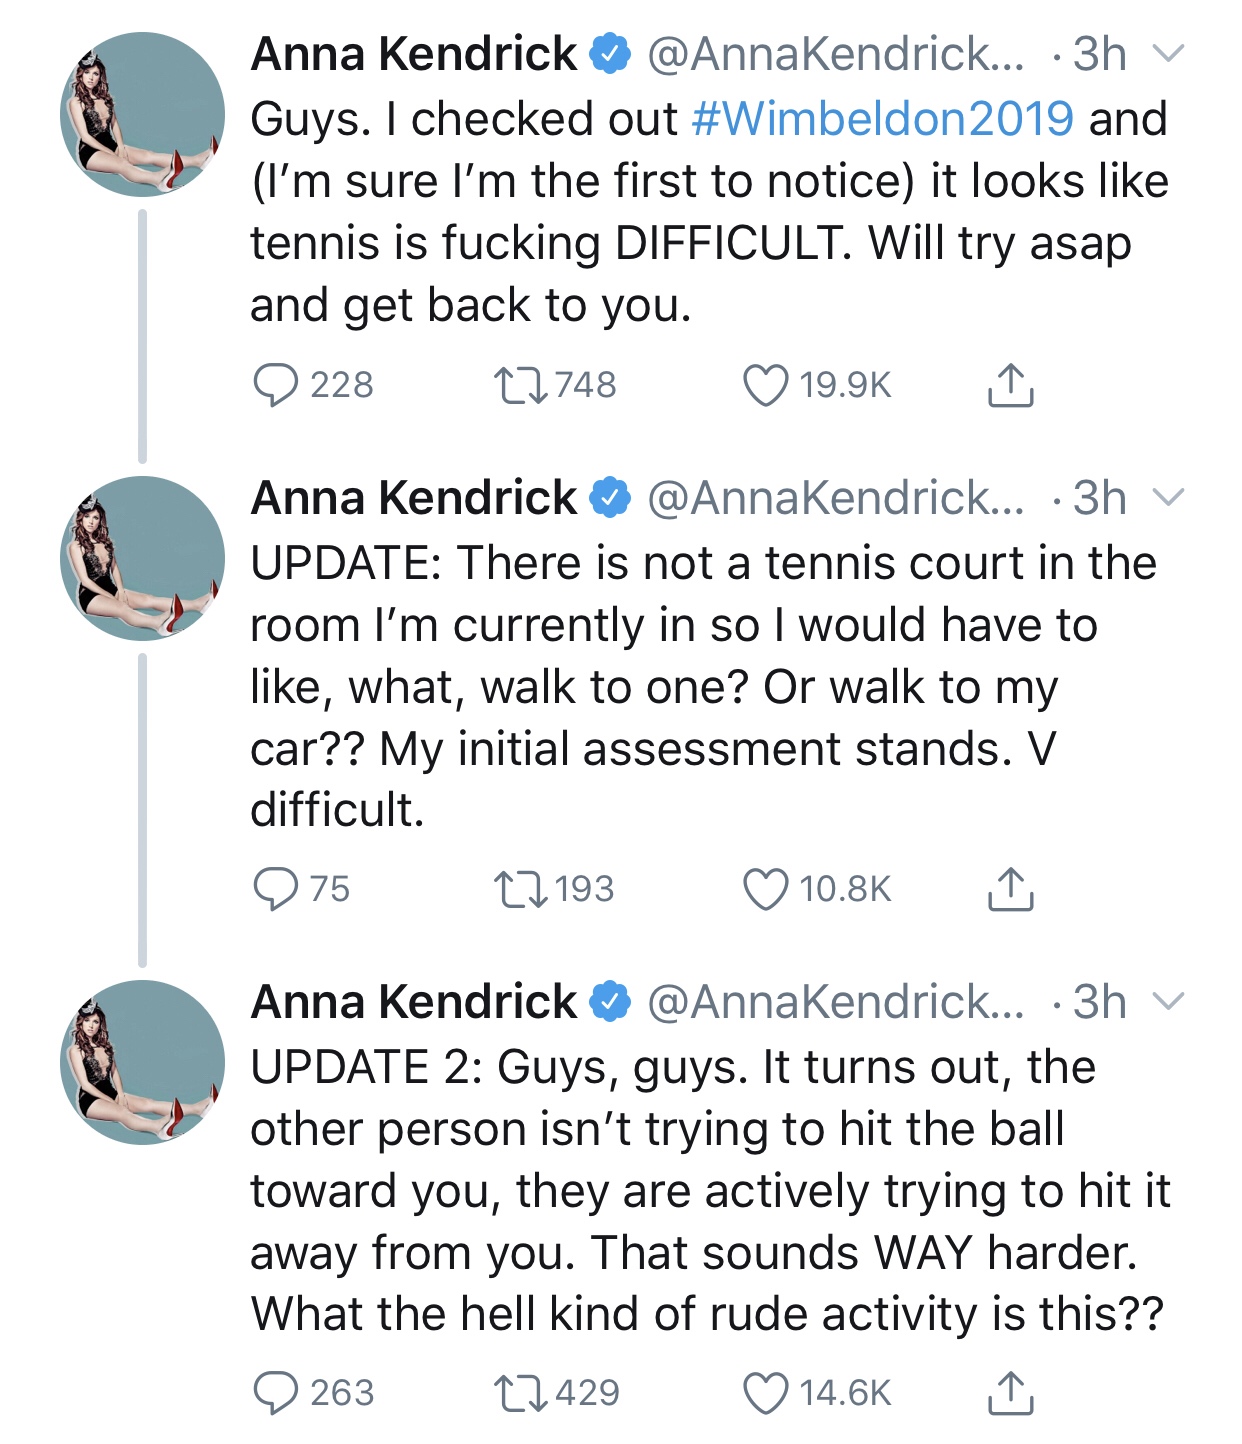 point - Anna Kendrick ... 3h v Guys. I checked out 2019 and I'm sure I'm the first to notice it looks tennis is fucking Difficult. Will try asap and get back to you. 2 228 22748 Anna Kendrick ... 3h v Update There is not a tennis court in the room I'm cur